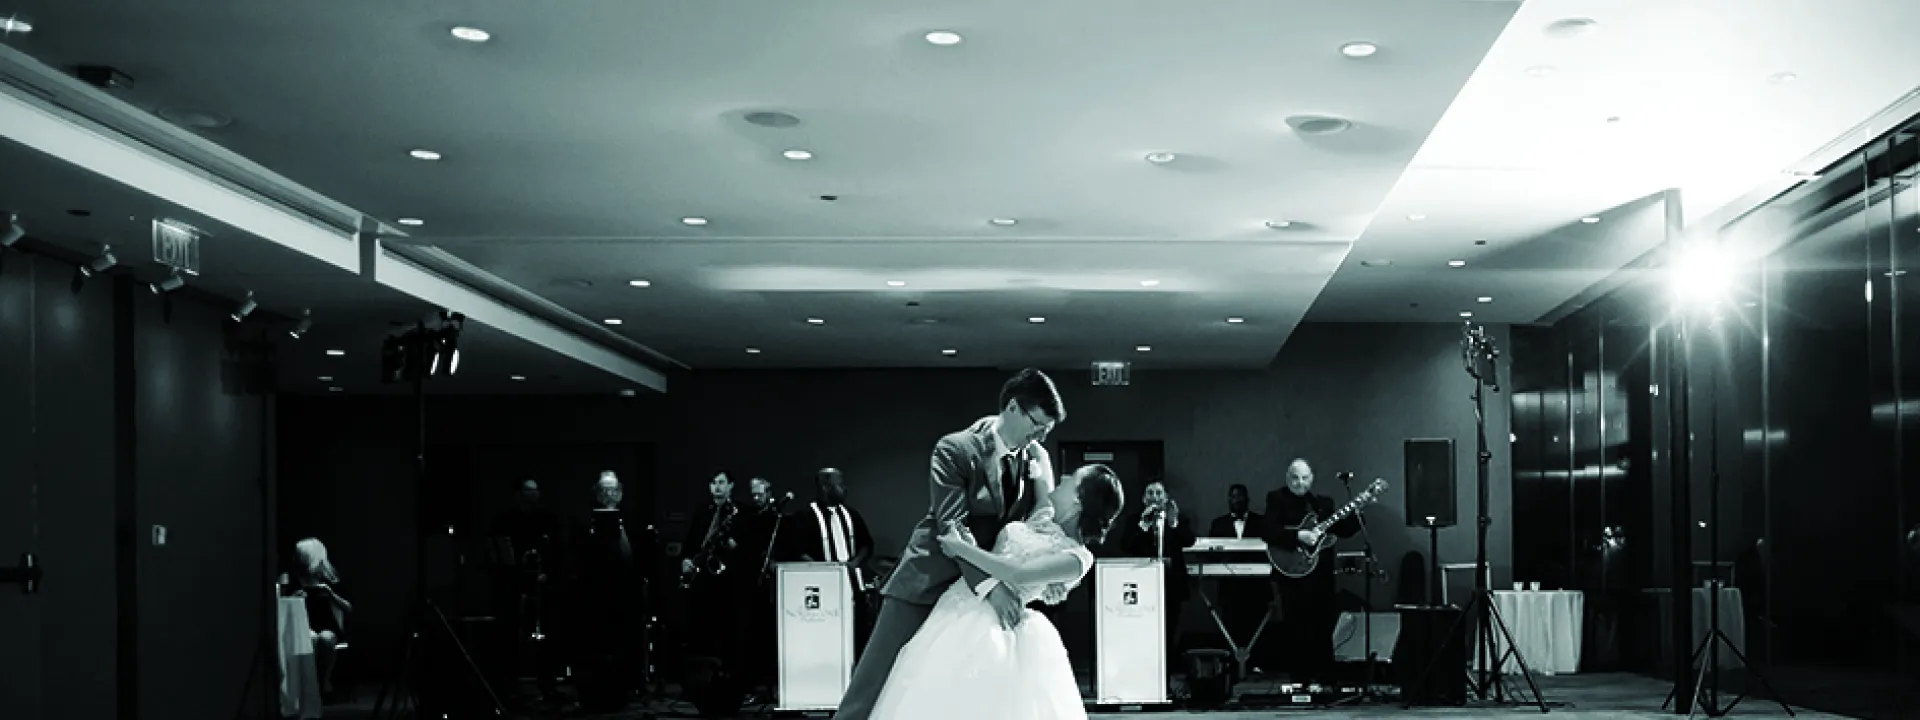 A couple performs their first dance at their wedding while a band plays in the background.